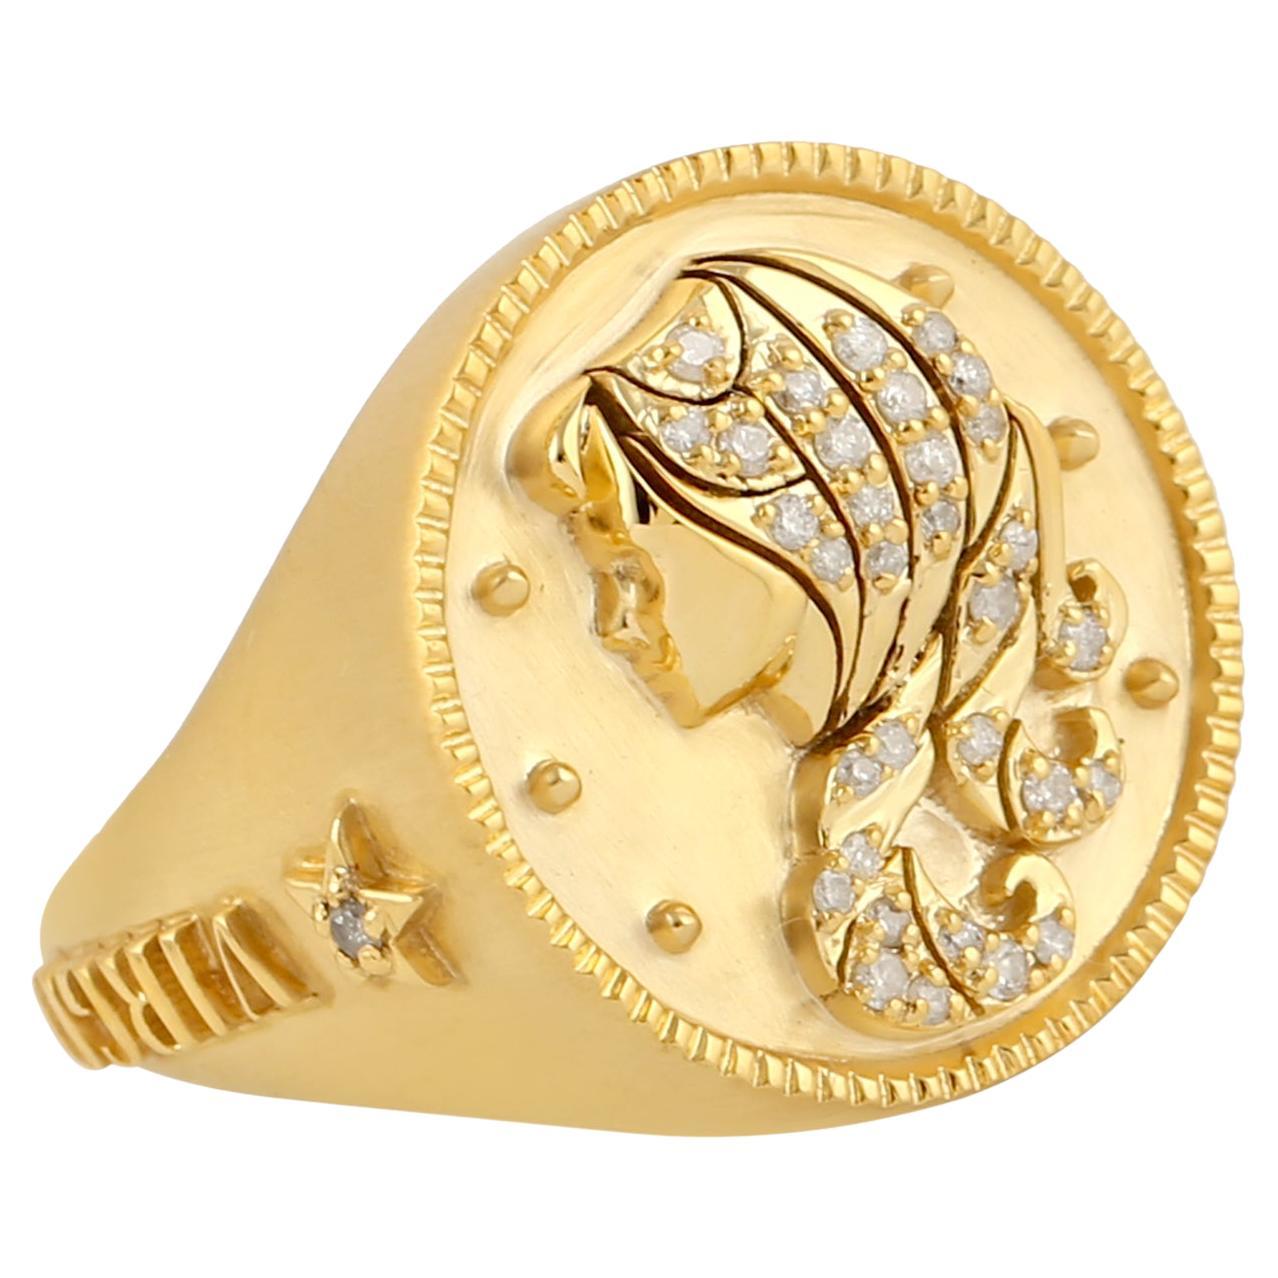 14k Golden Ring With Pave Diamong Setting In Swirl Virgo Zodiac Sunsign For Sale